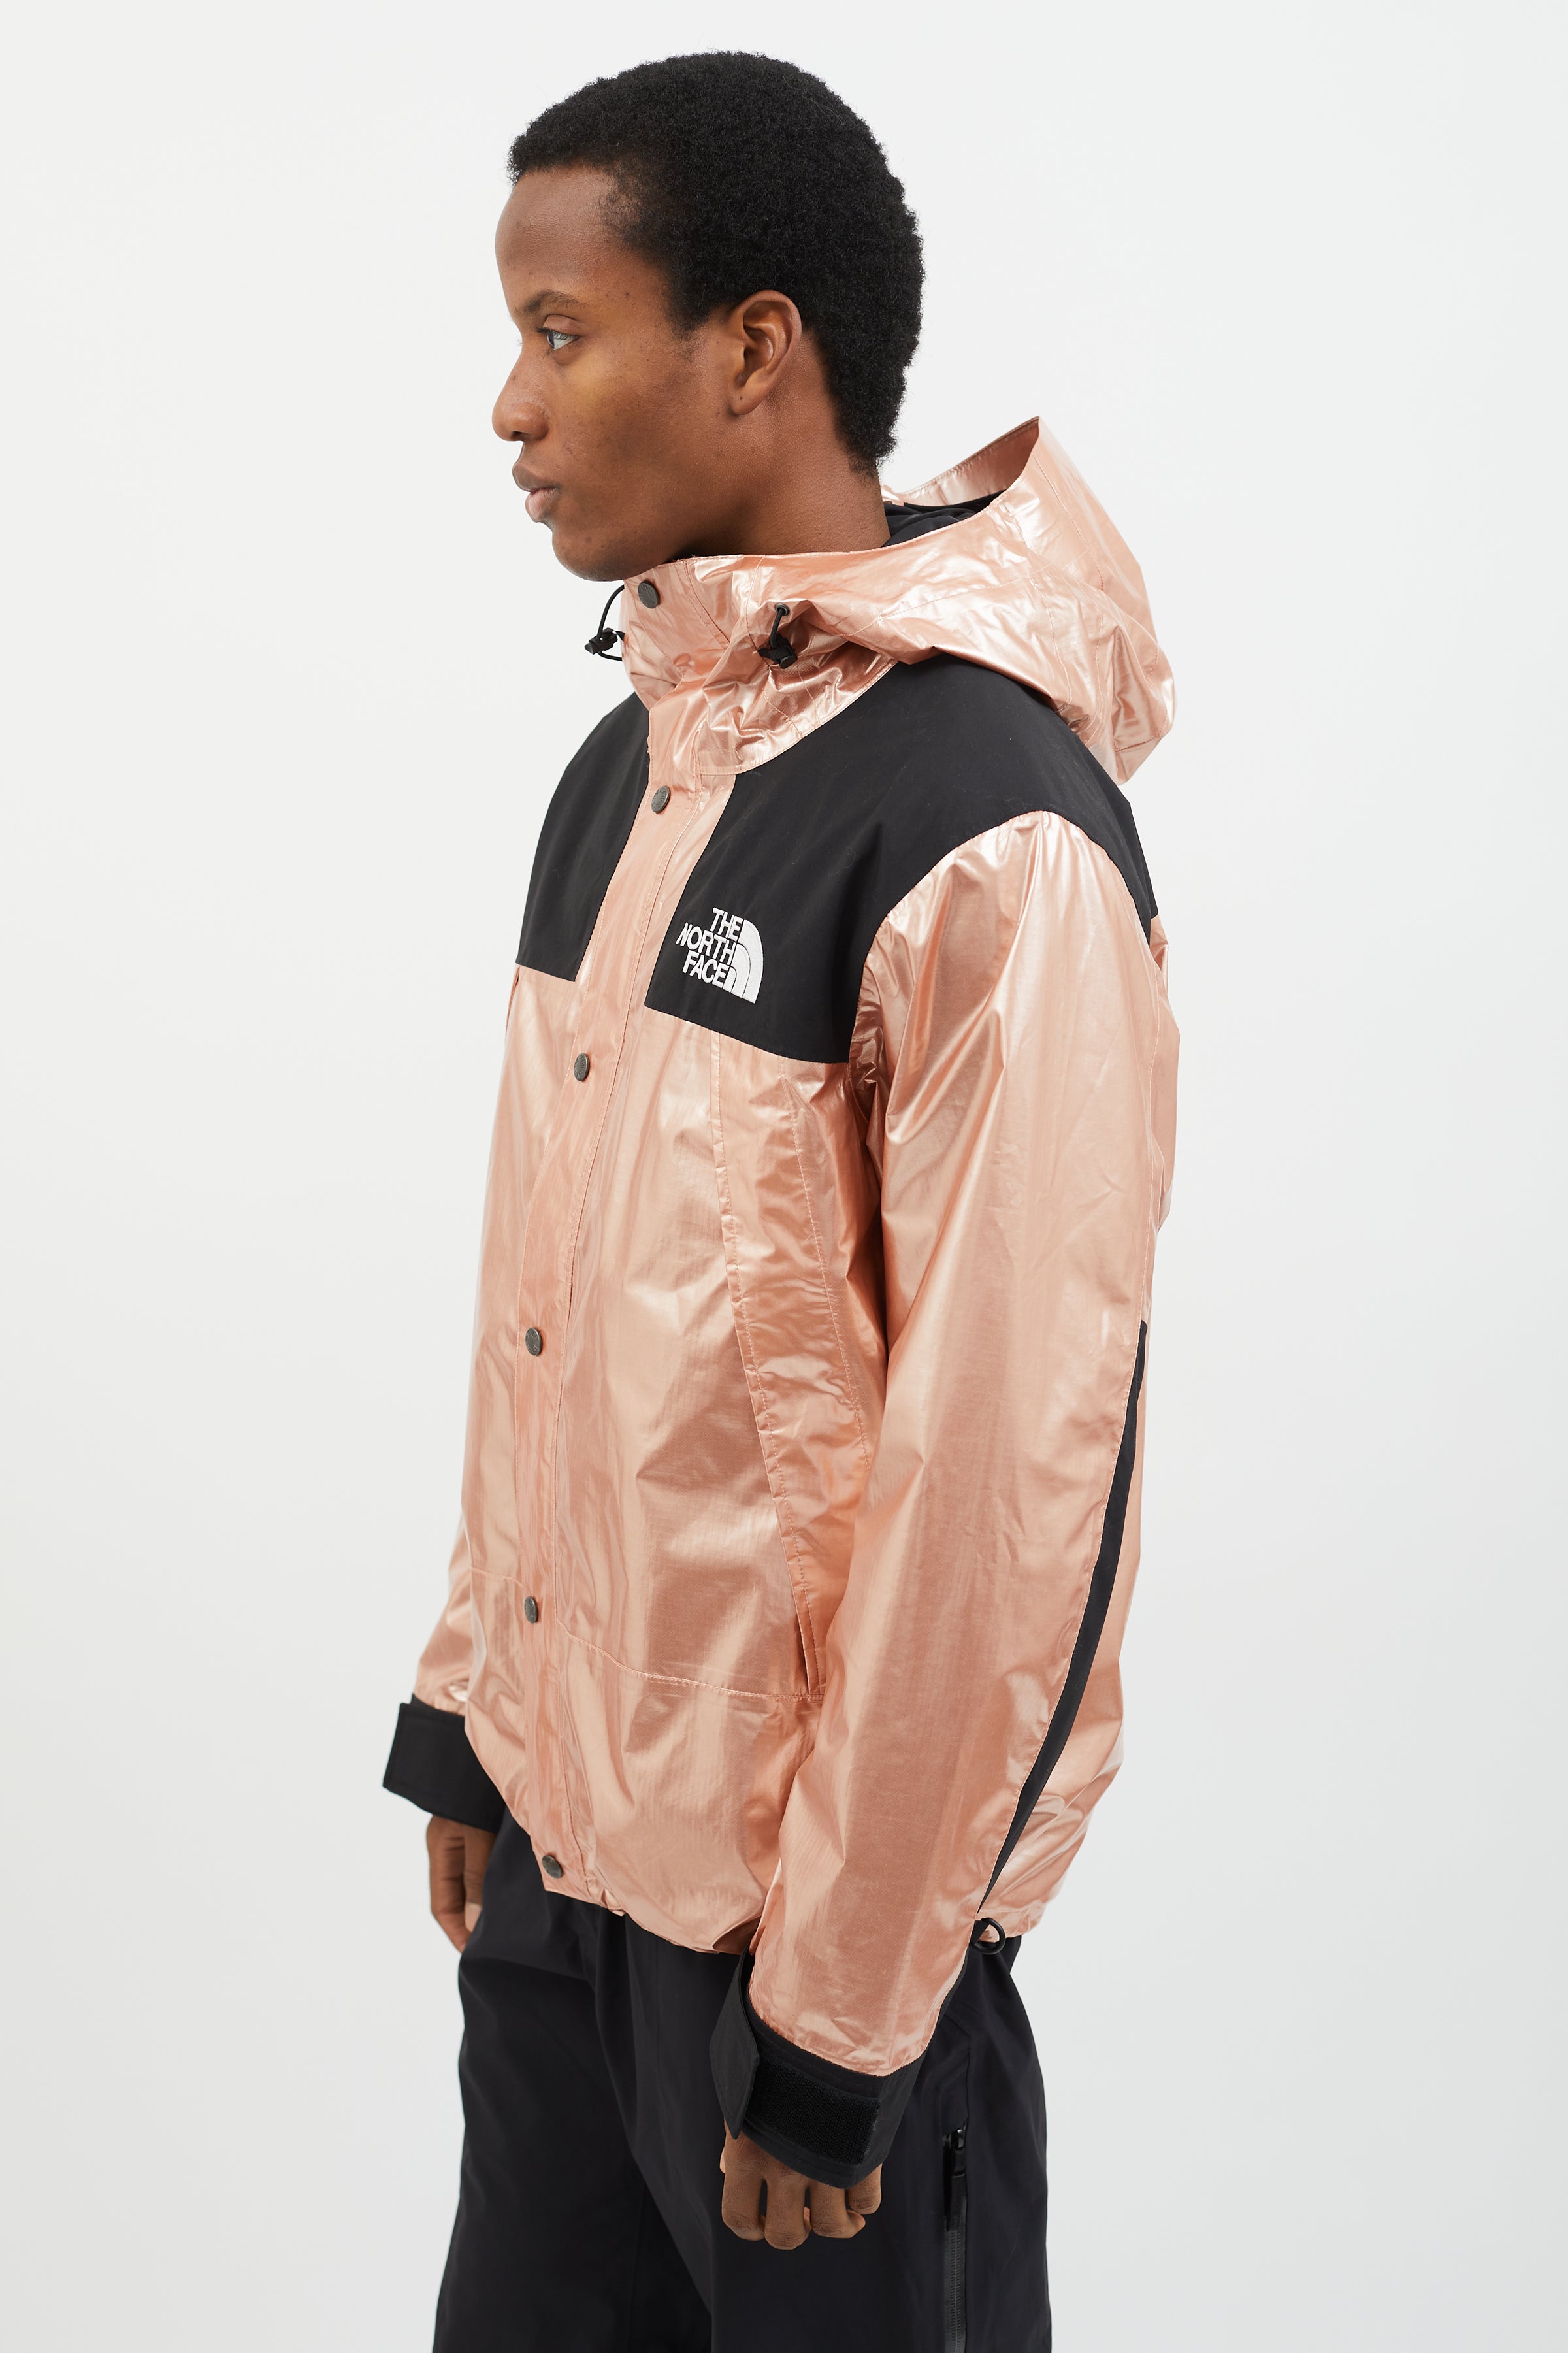 Ss18 Supreme x The North Face 'Metallic' Mountain Parka Jacket — The Pop-Up